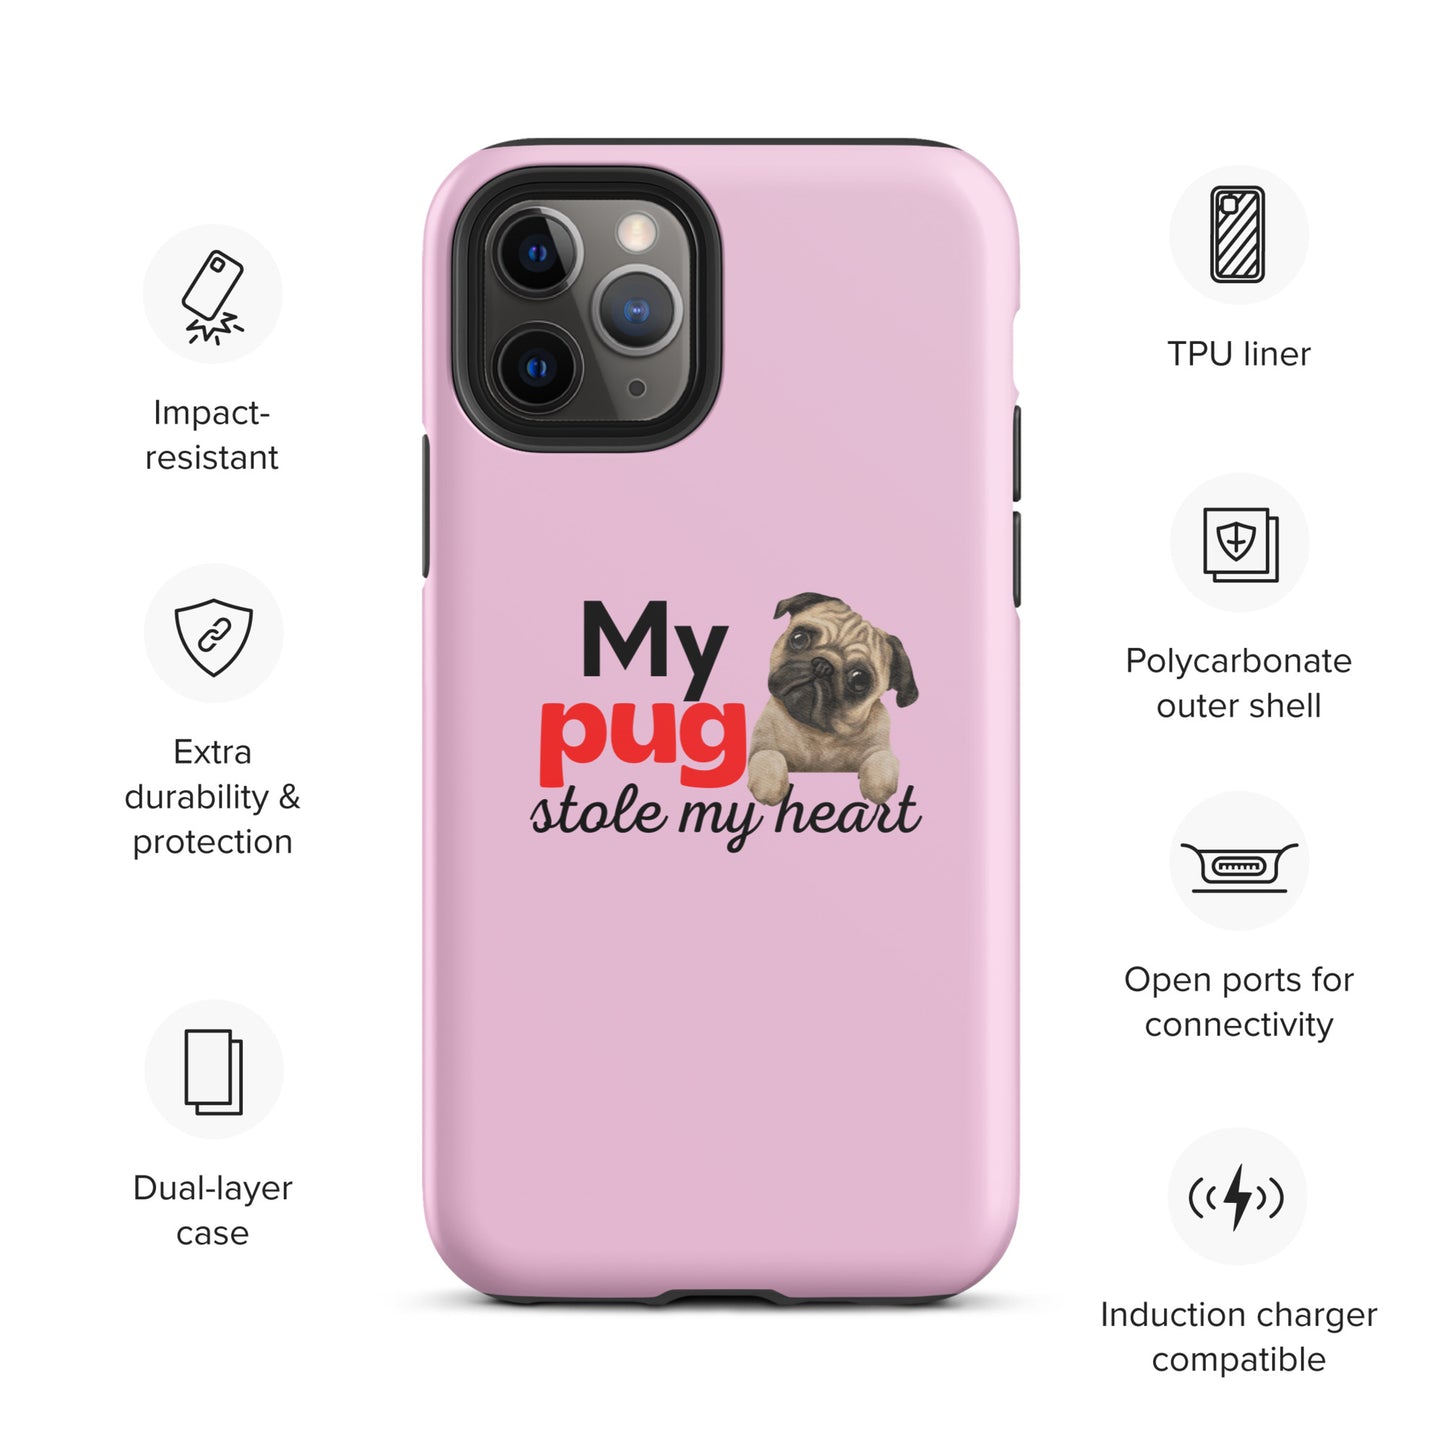 iPhone case 'My Pug stole my heart' Pink